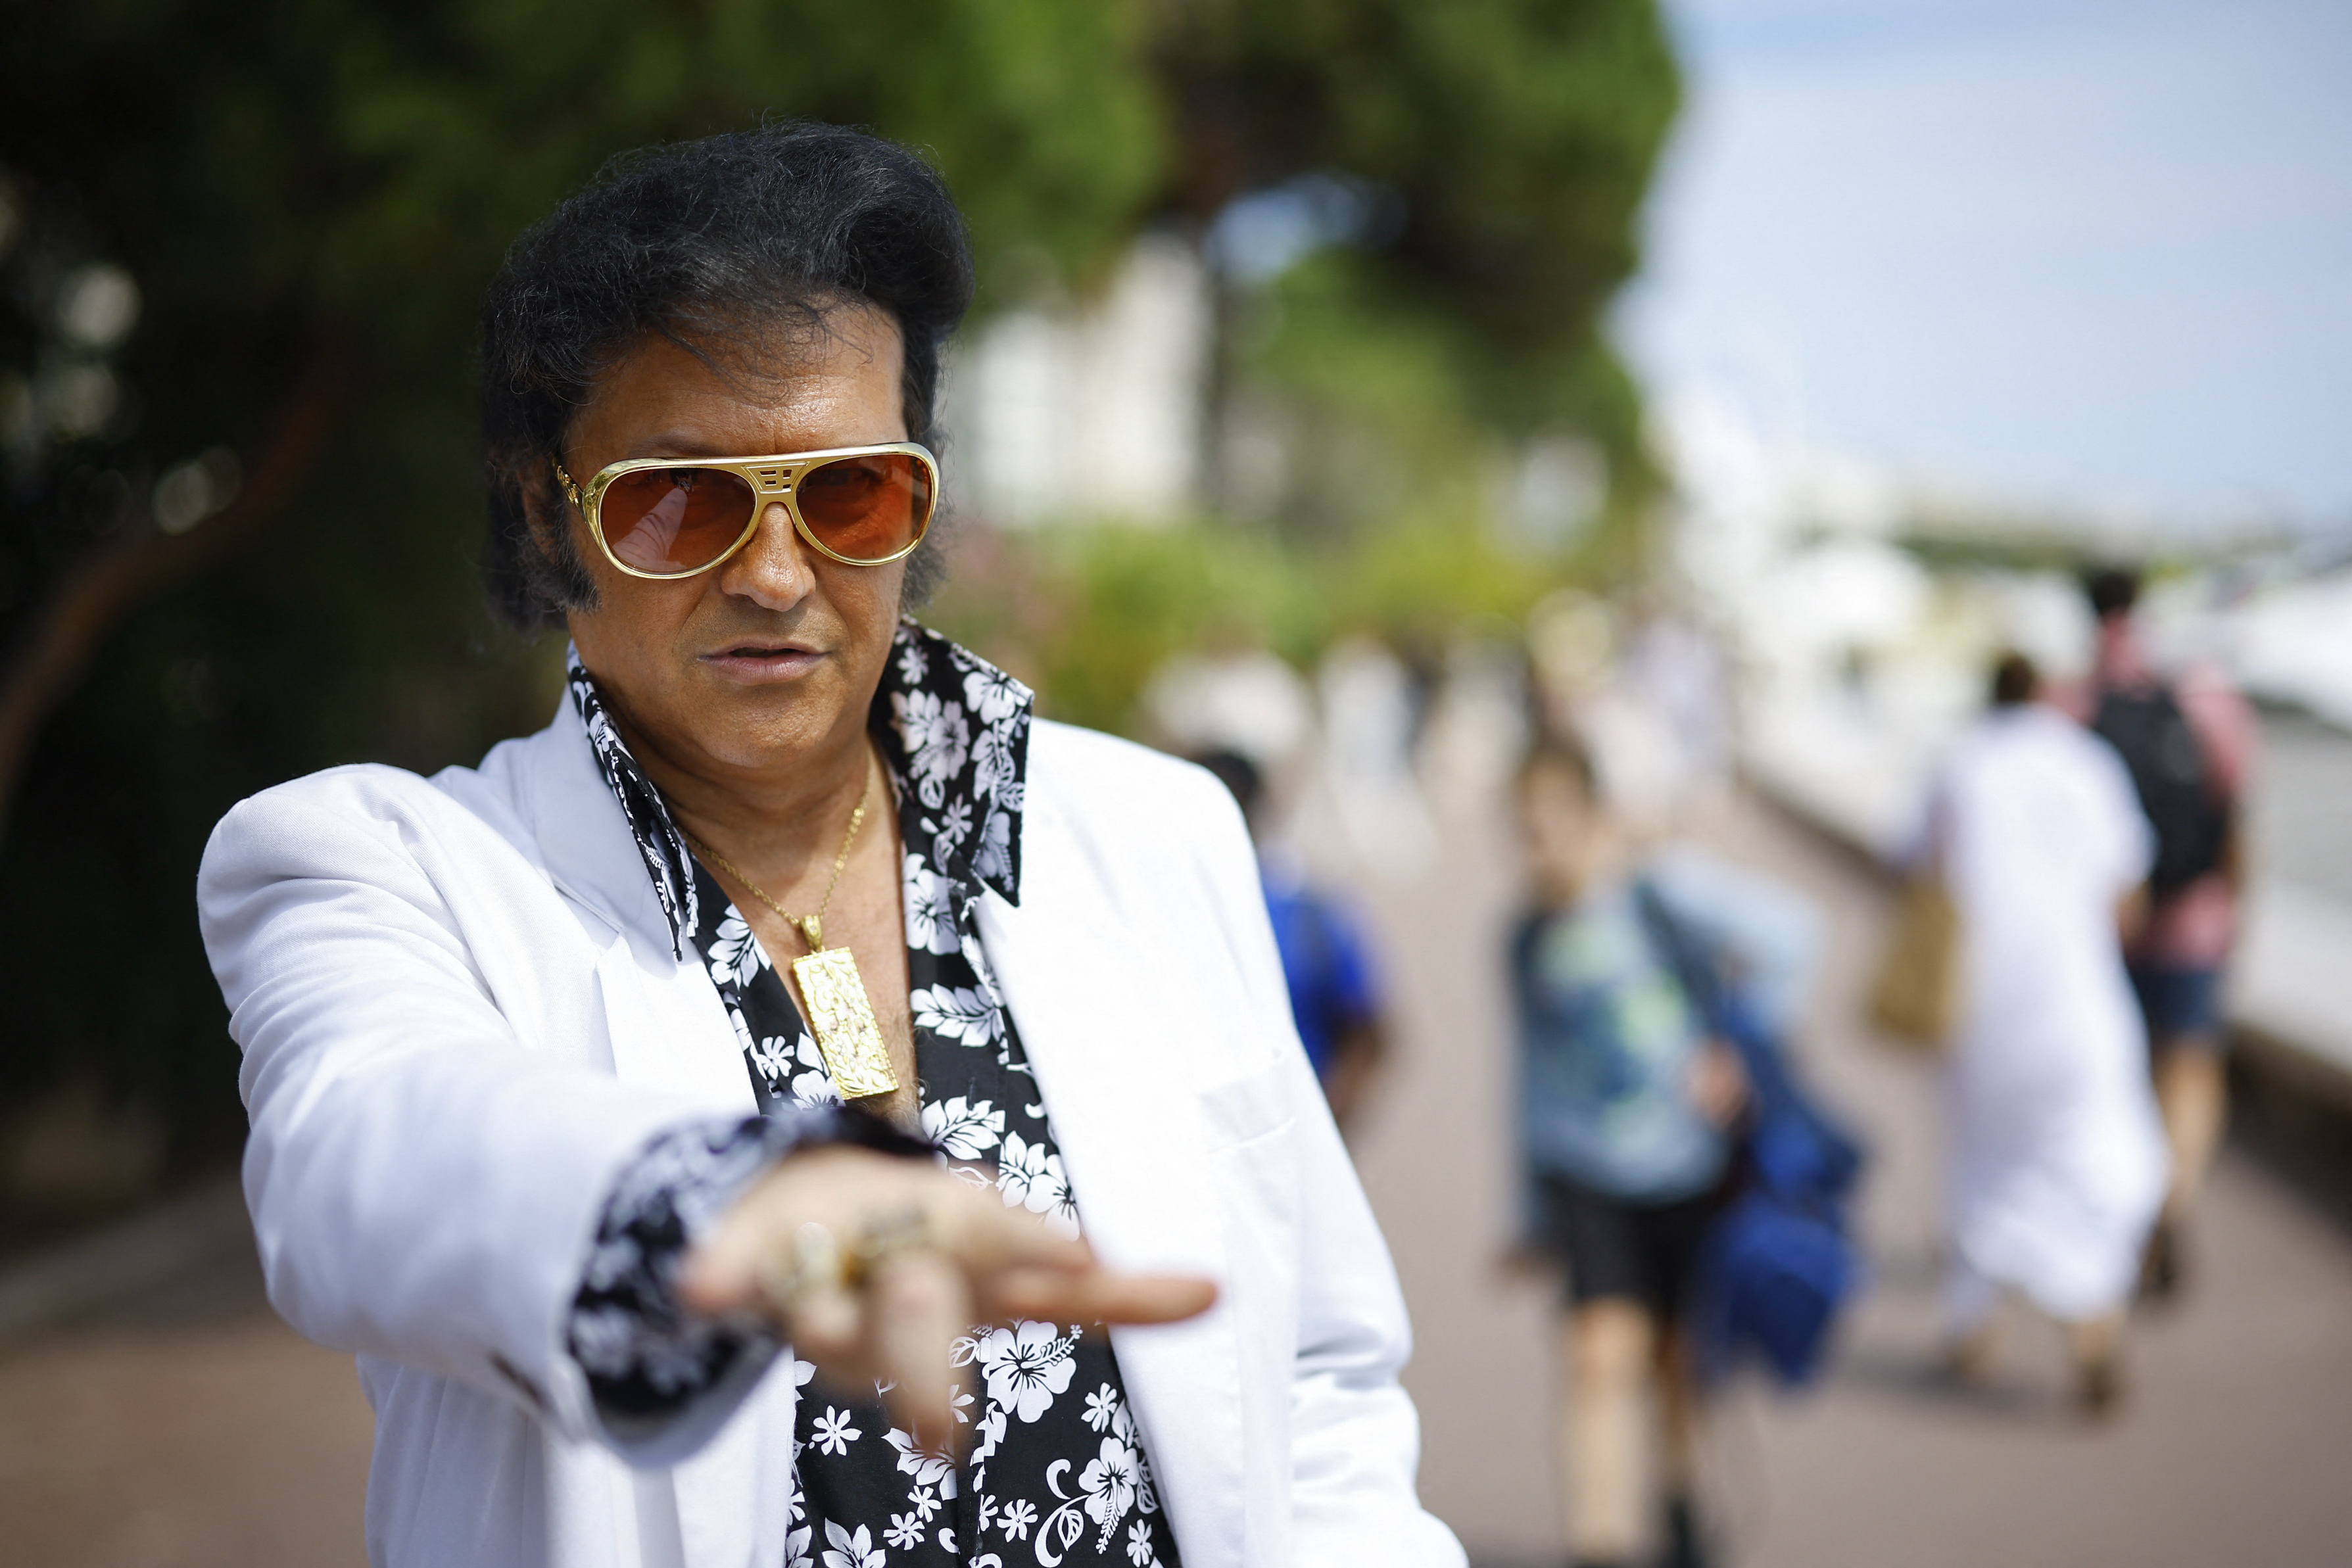 The 75th Cannes Film Festival - Elvis Presley impersonator